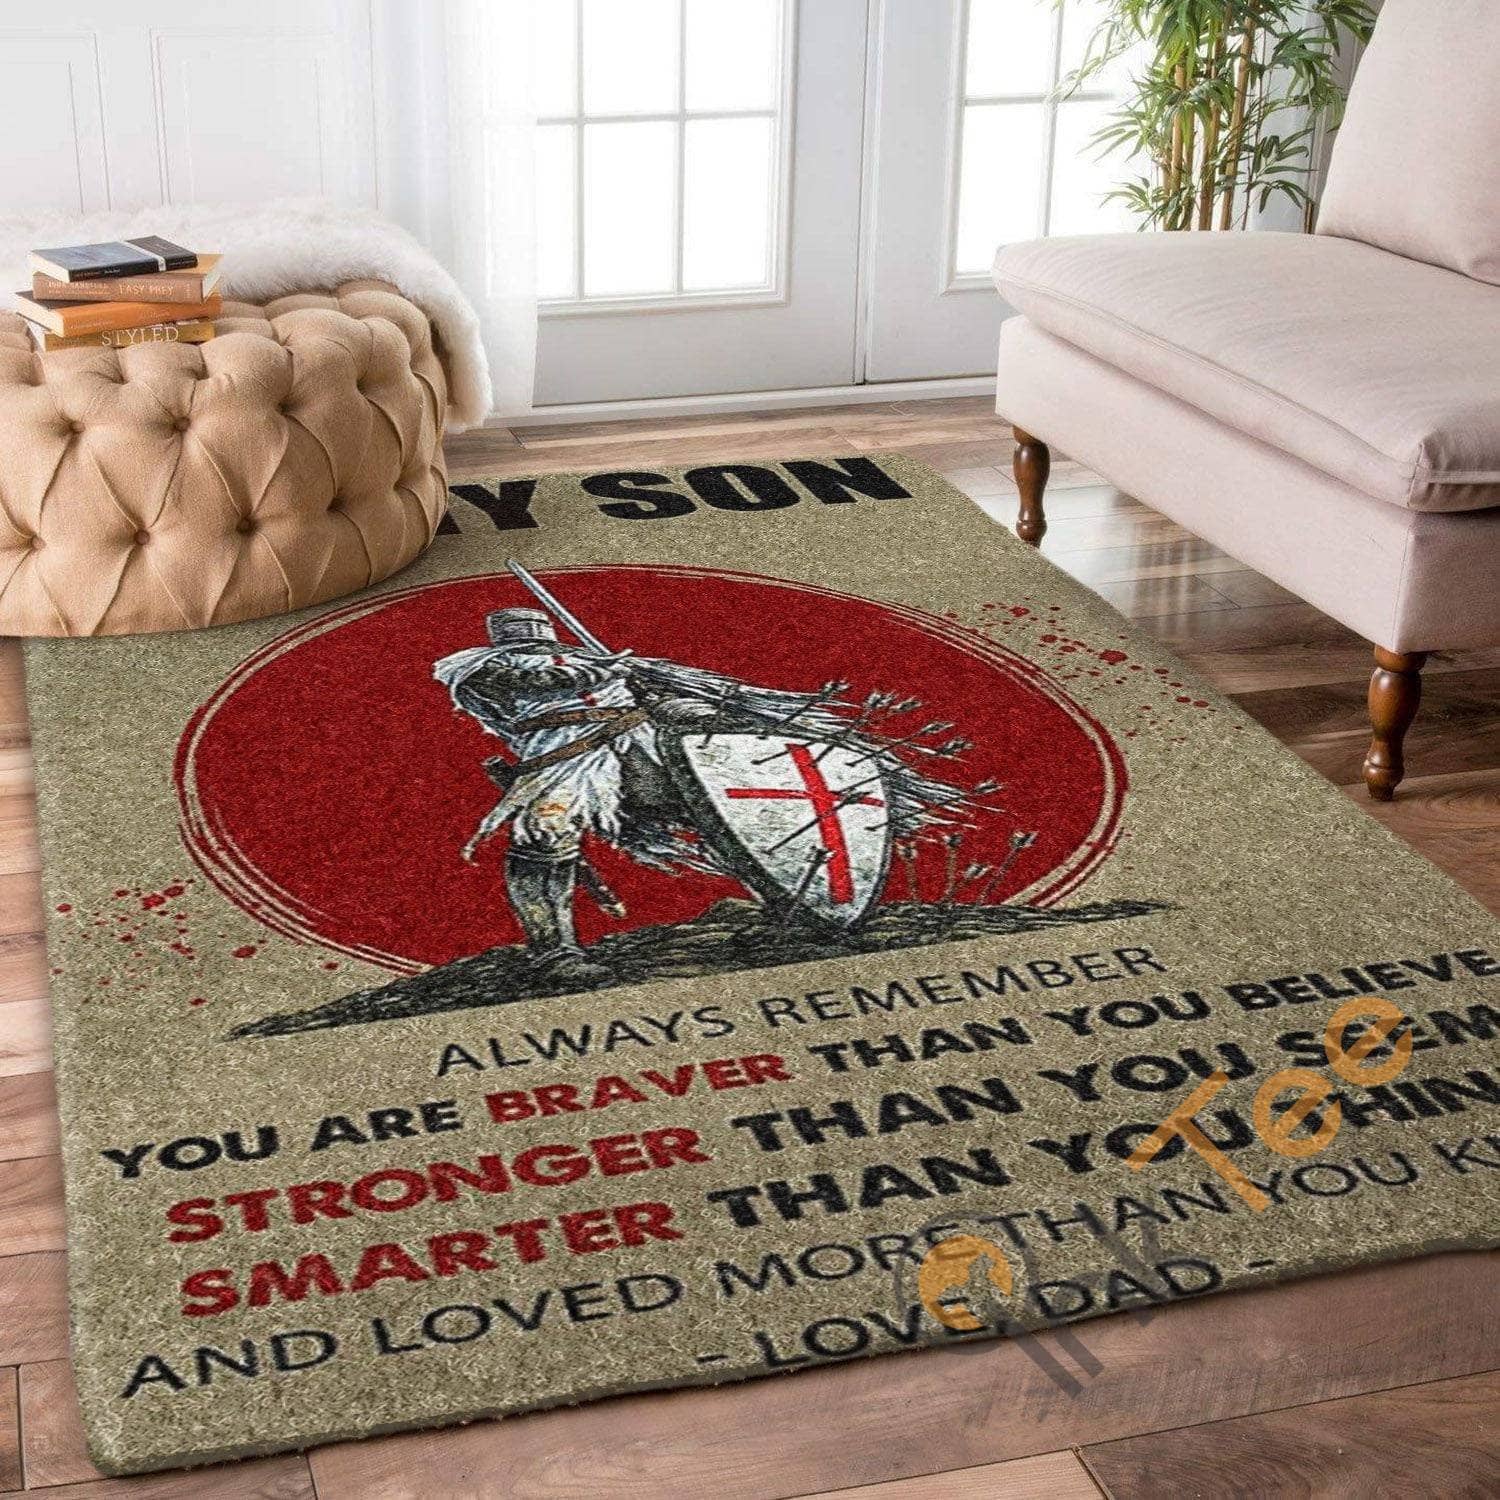 Dad To Son My Remember You're Loved More Than You Know Samurai Bedroom Home Decoration Gift For Rug